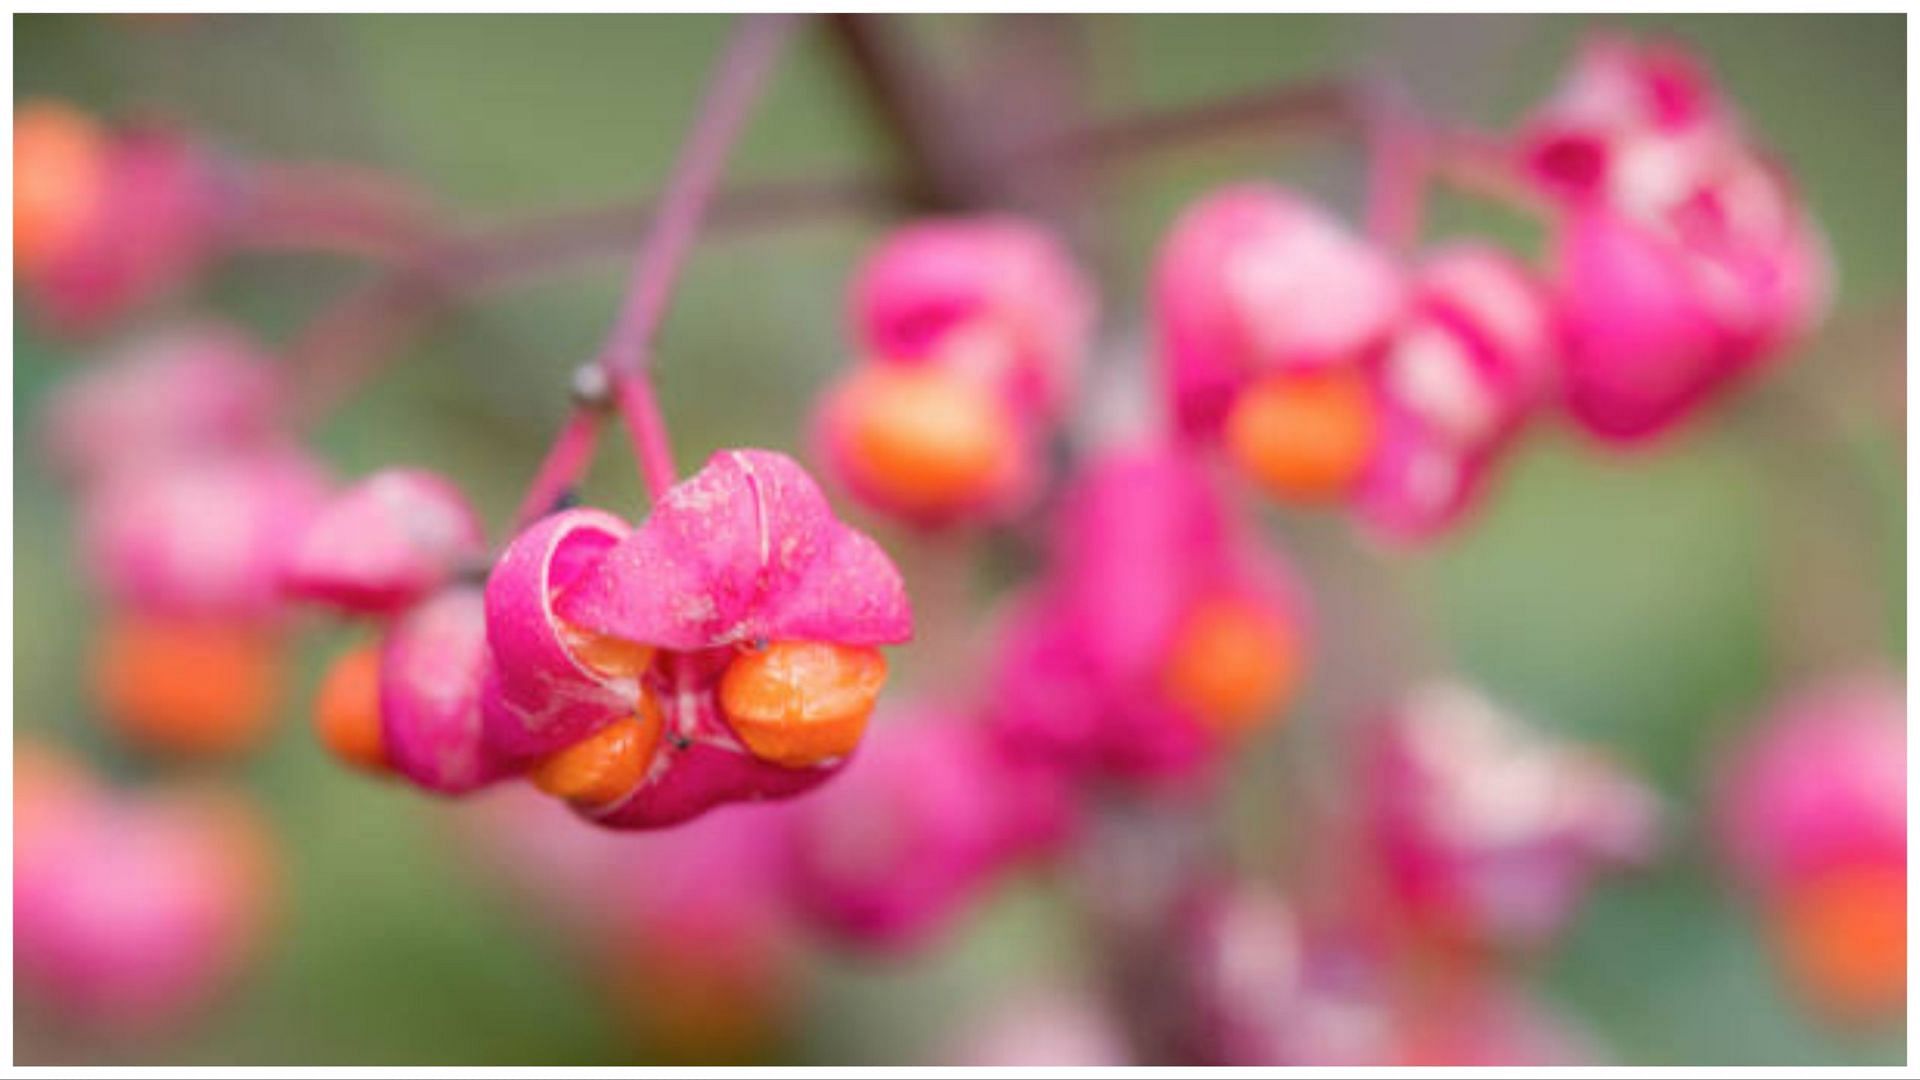 European spindle is among the poisonous fruits. (Image via Getty)